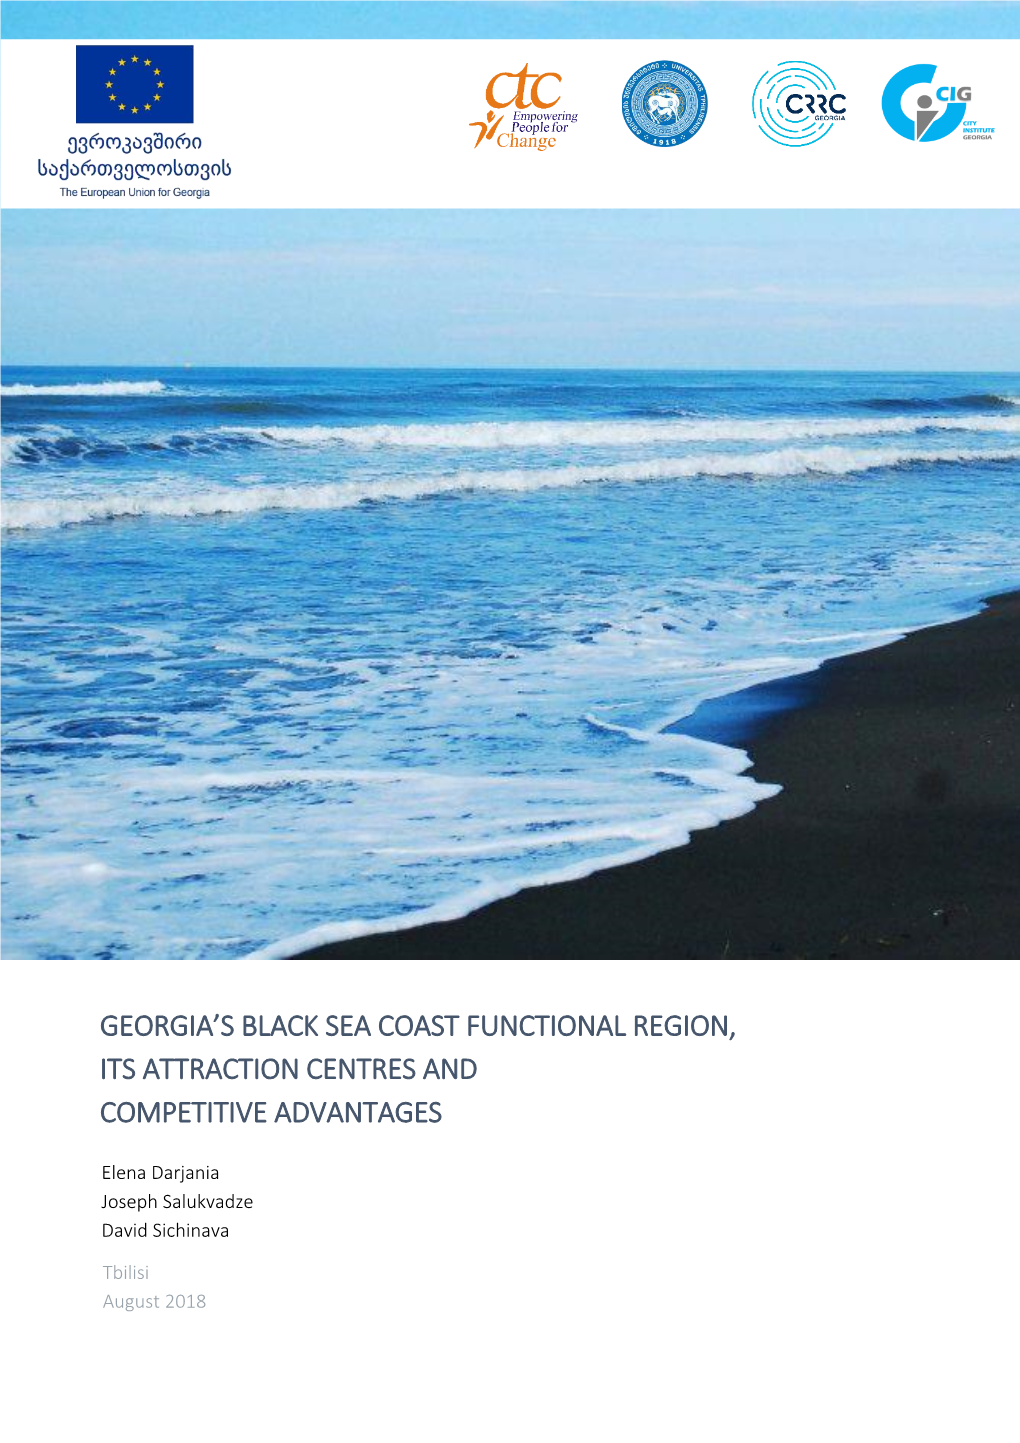 Georgia's Black Sea Coast Functional Region, Its Attraction Centres and Competitive Advantages